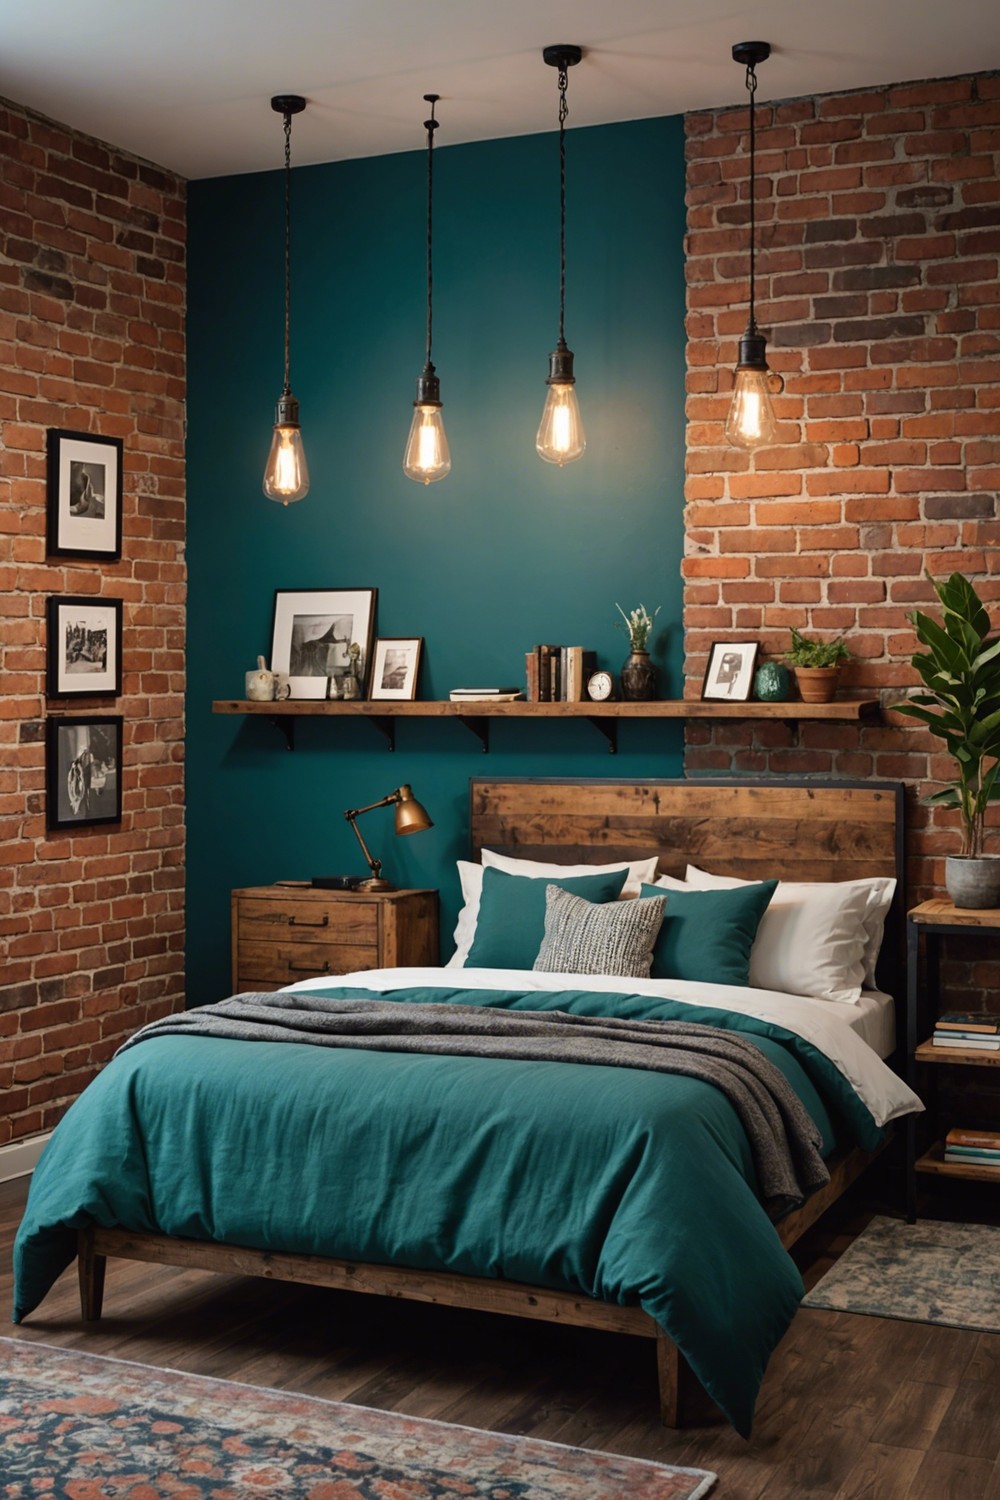 Industrial Chic: Teal with Exposed Brick